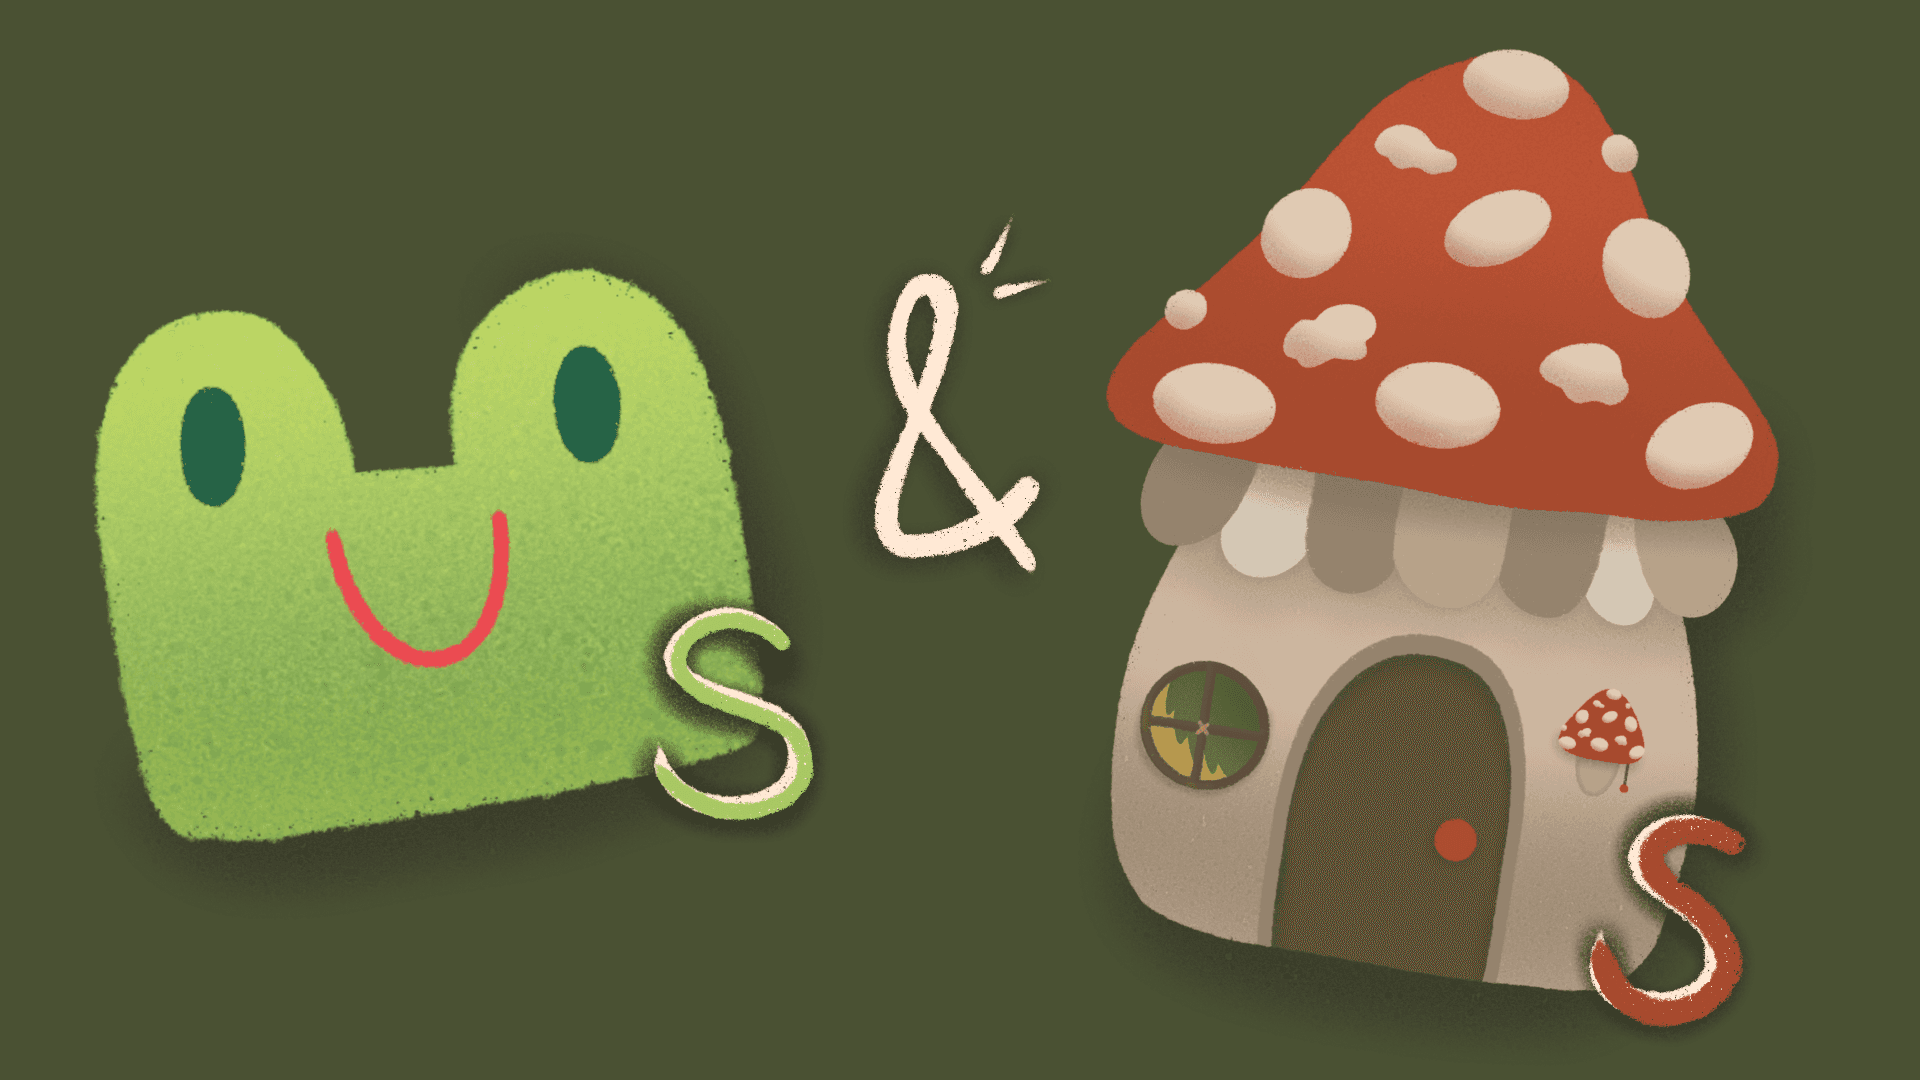 Introducing our first project that involves frogs and mushroom houses.